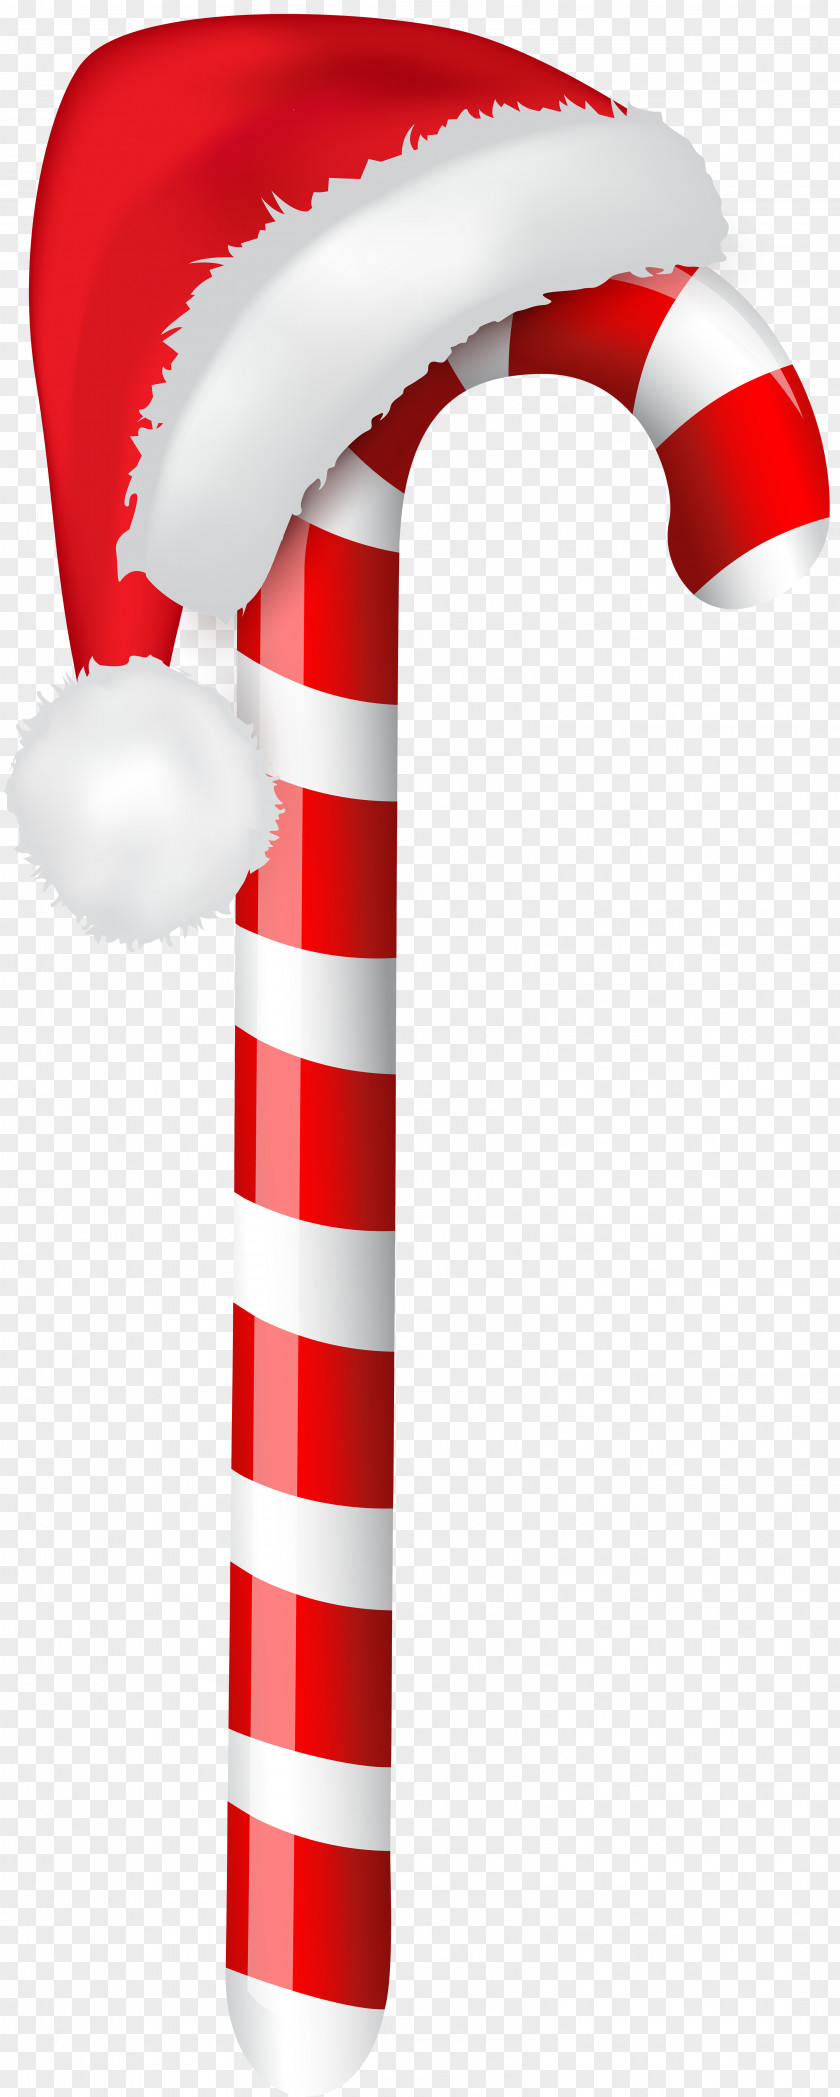 Candy Cane With Santa Hat Clip Art Image Claus Christmas PNG